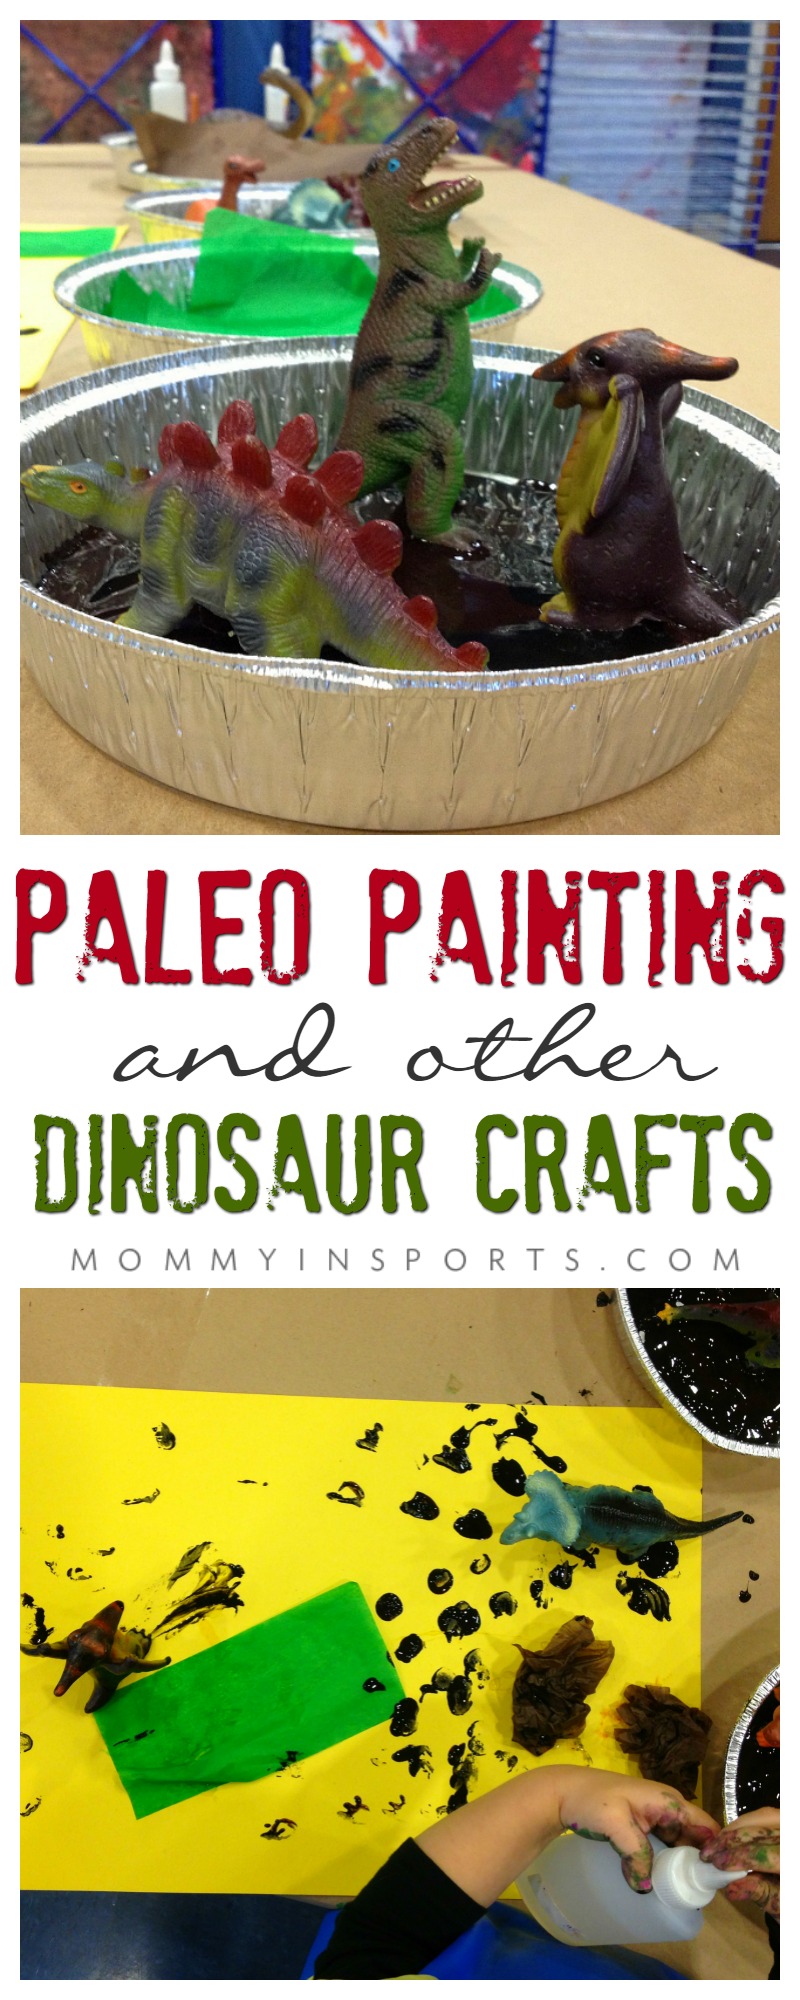 Looking for some dinosaur fun? Try this paleo painting, it's so fun for kids to use other mediums to paint! Also included are the best dinosaur books and sensory bins! The perfect dinosaur crafts for your budding artists!